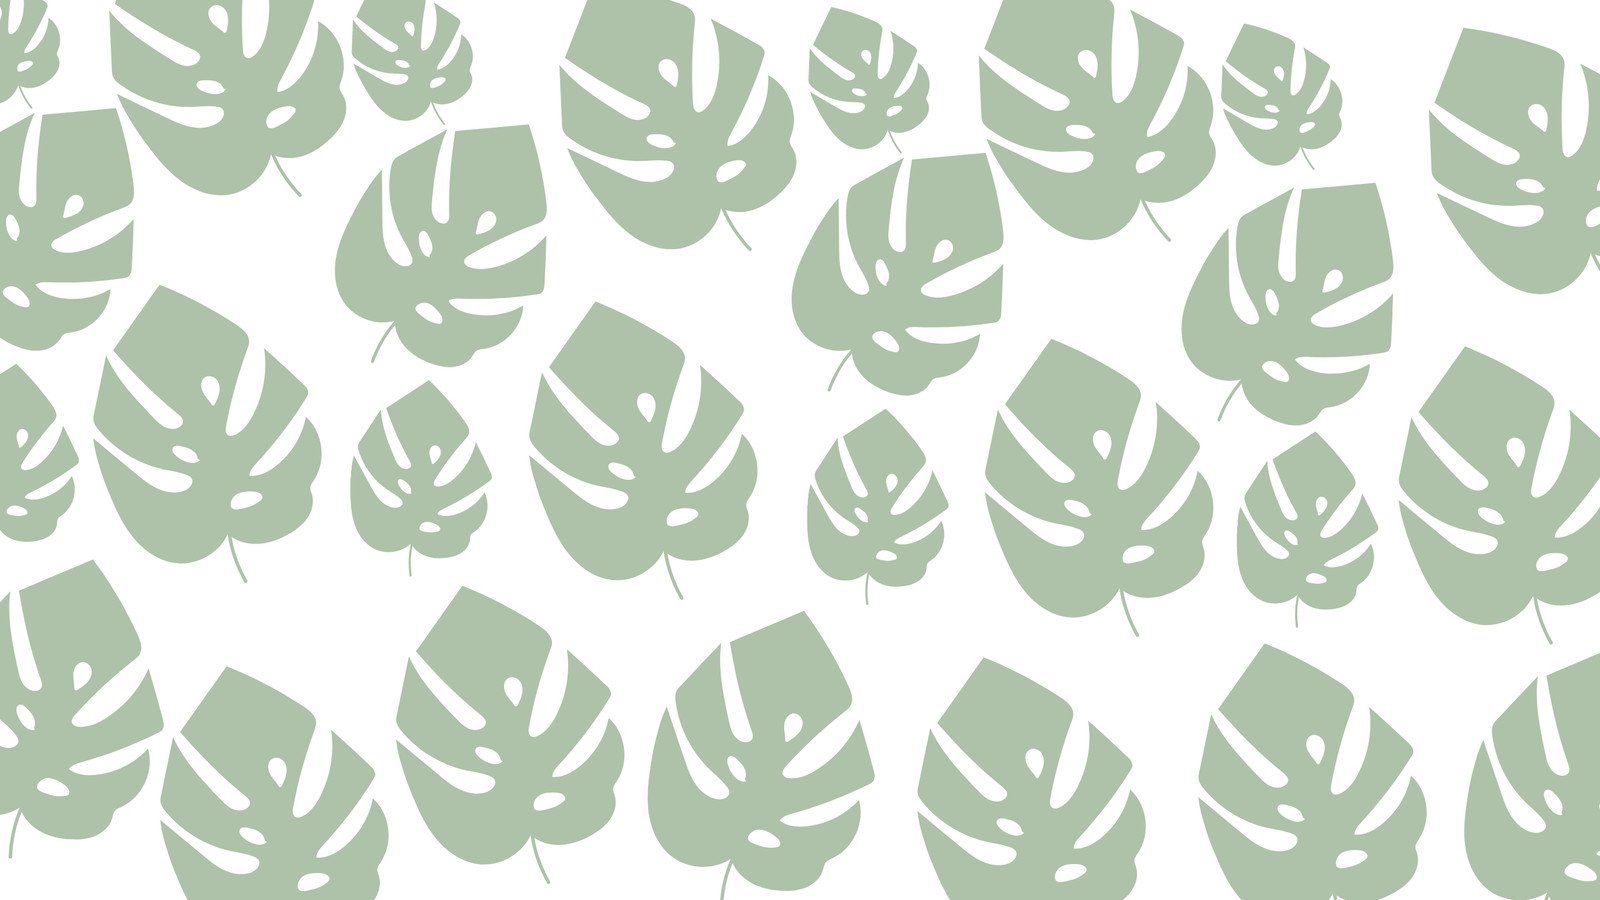 A pattern of green monstera leaves on a white background - Monstera